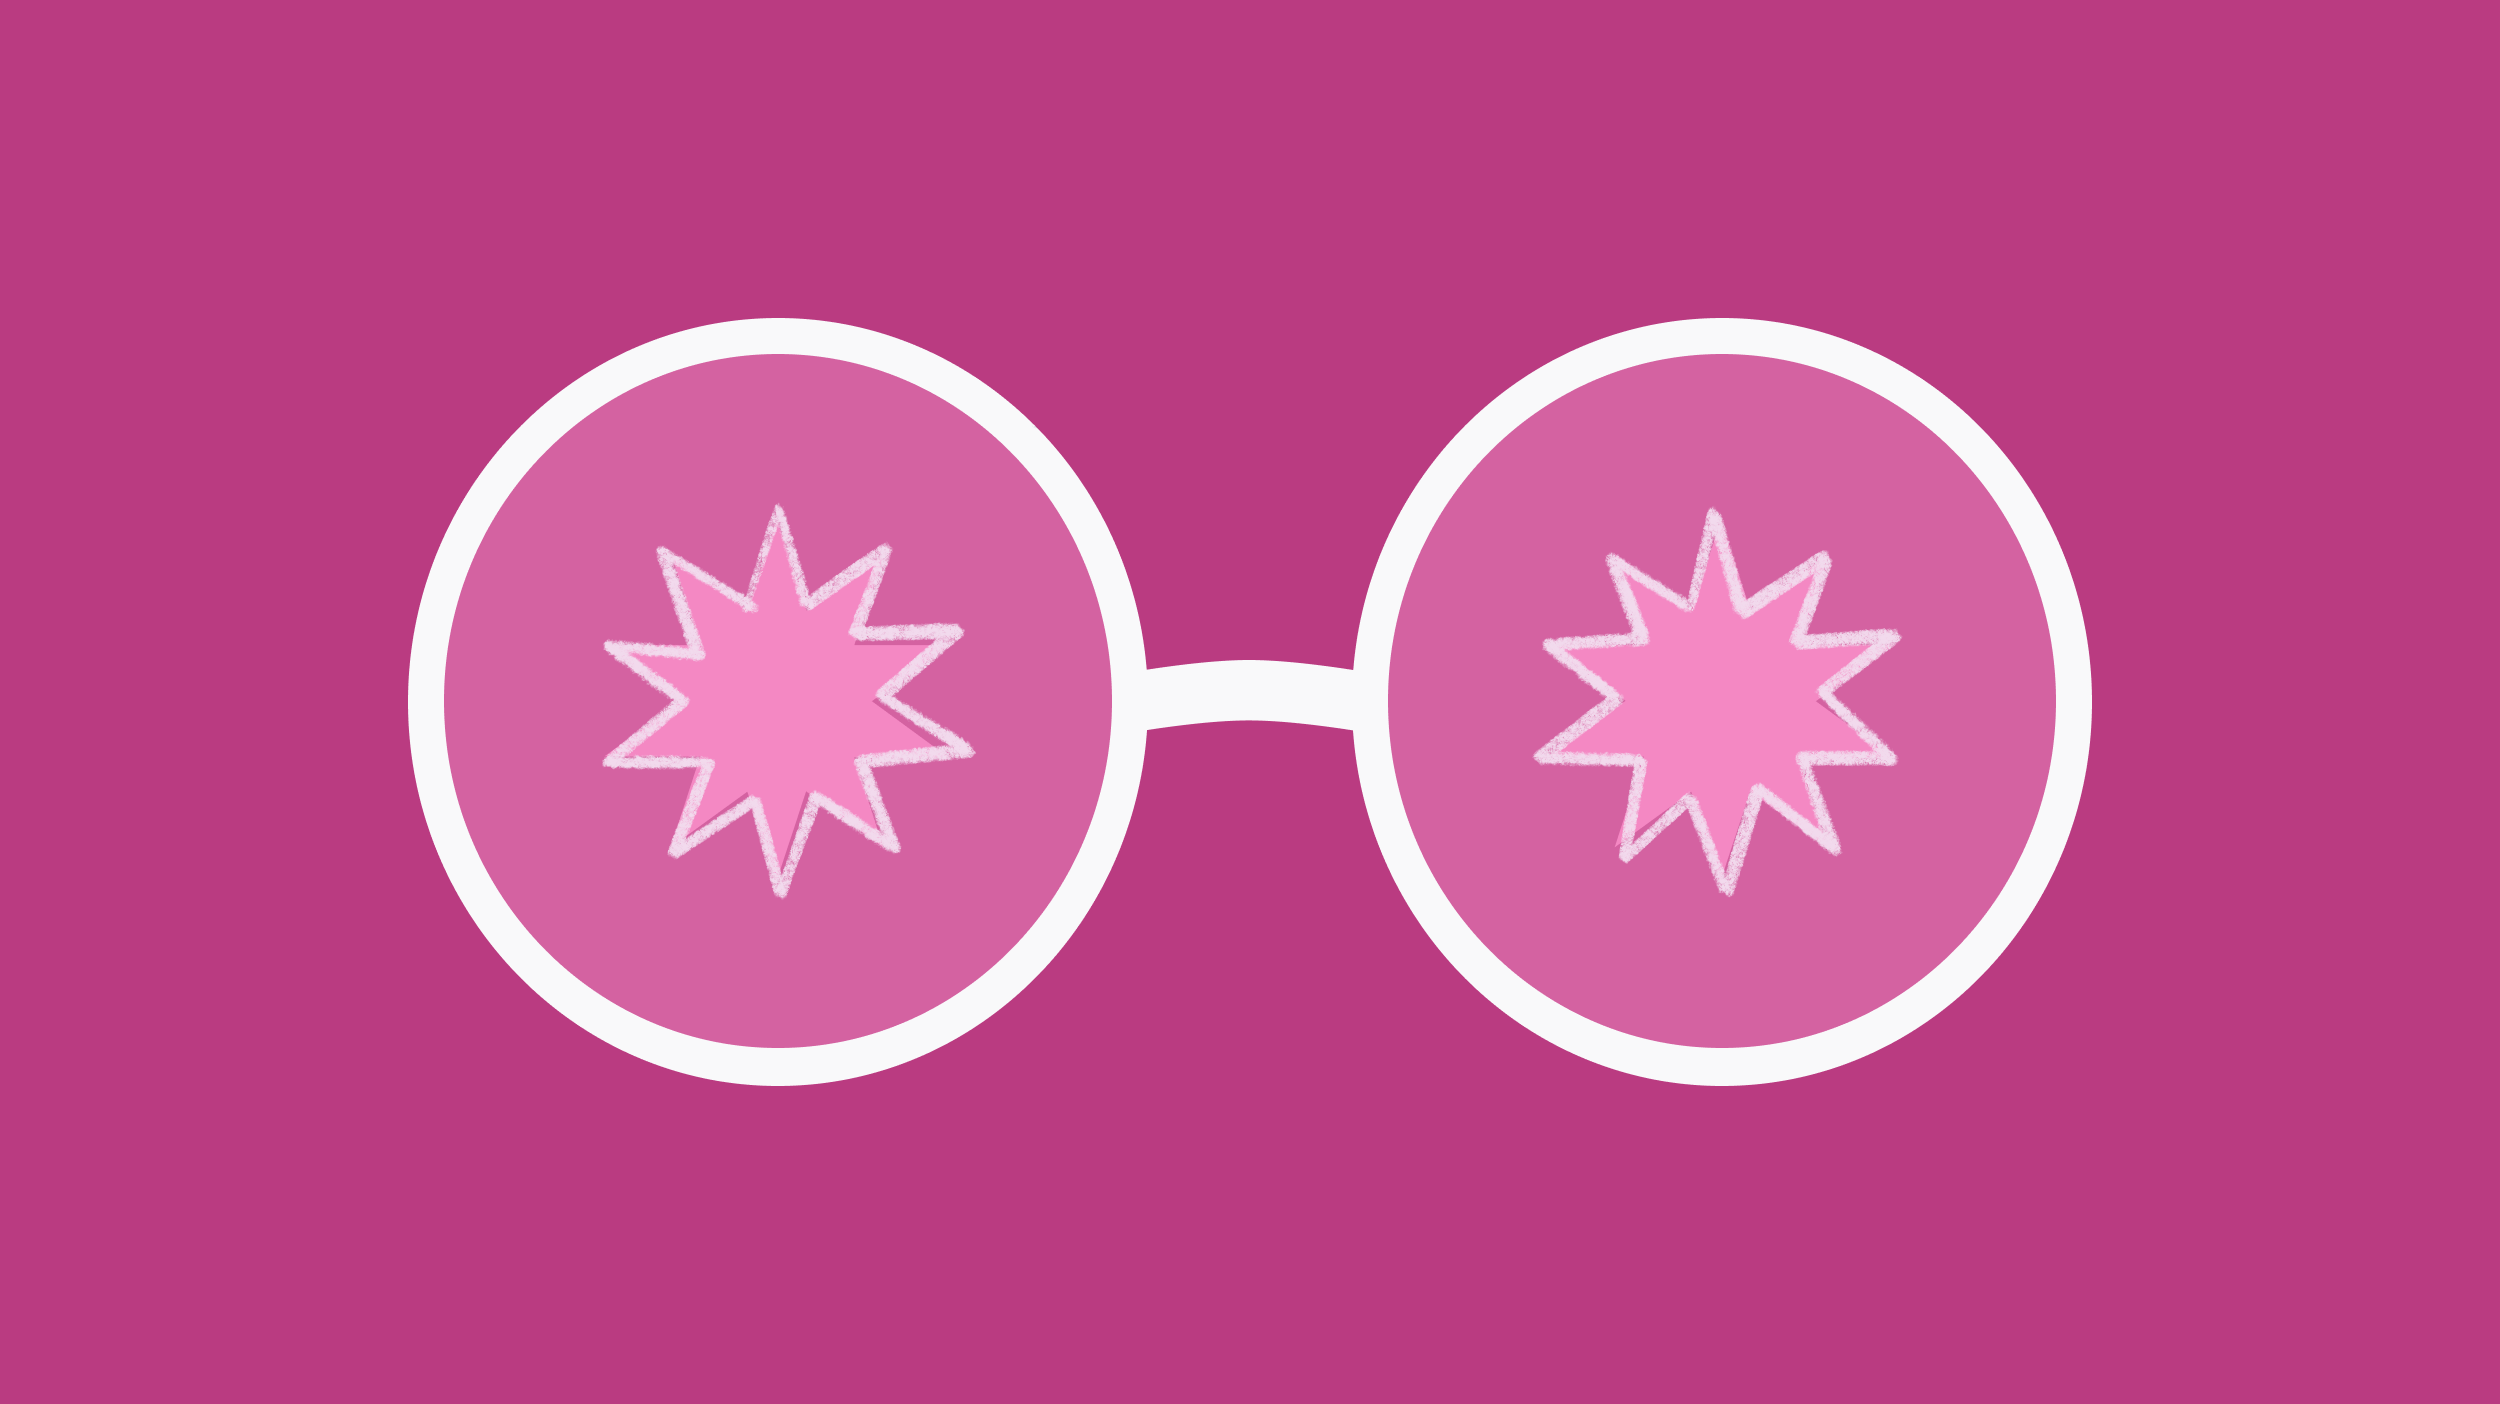 Glasses on pink background